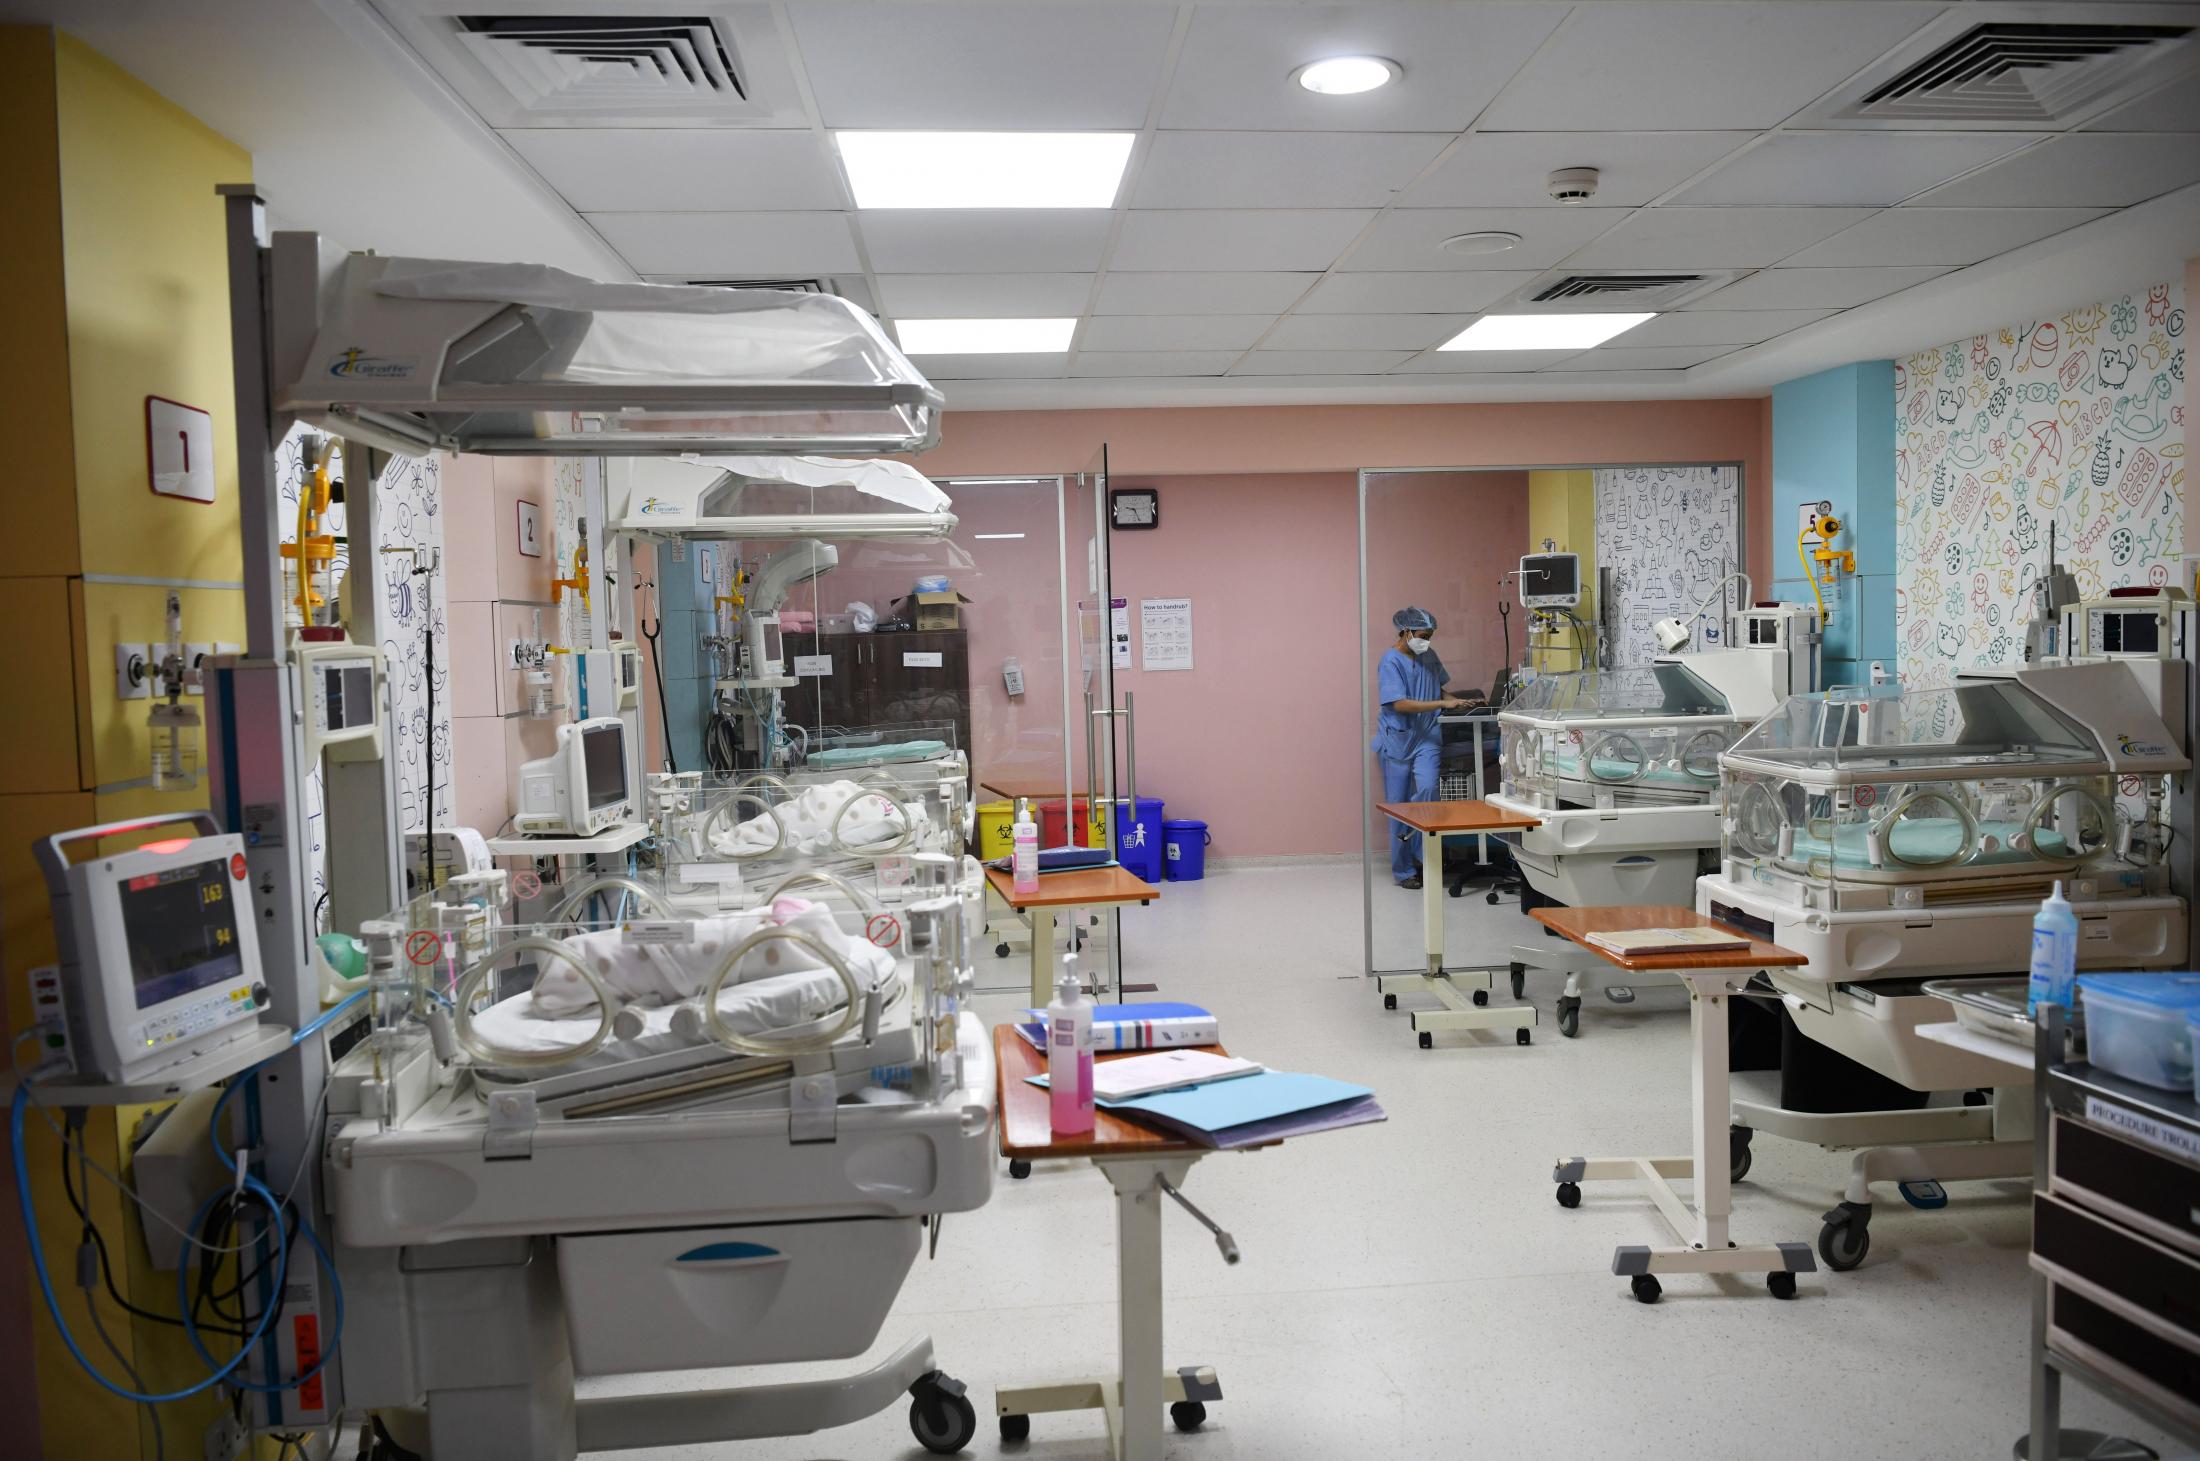 Doctors in the NICU have been busy attending to premature, ill or babies who&#39;s mothers have tested positive for Covid-19